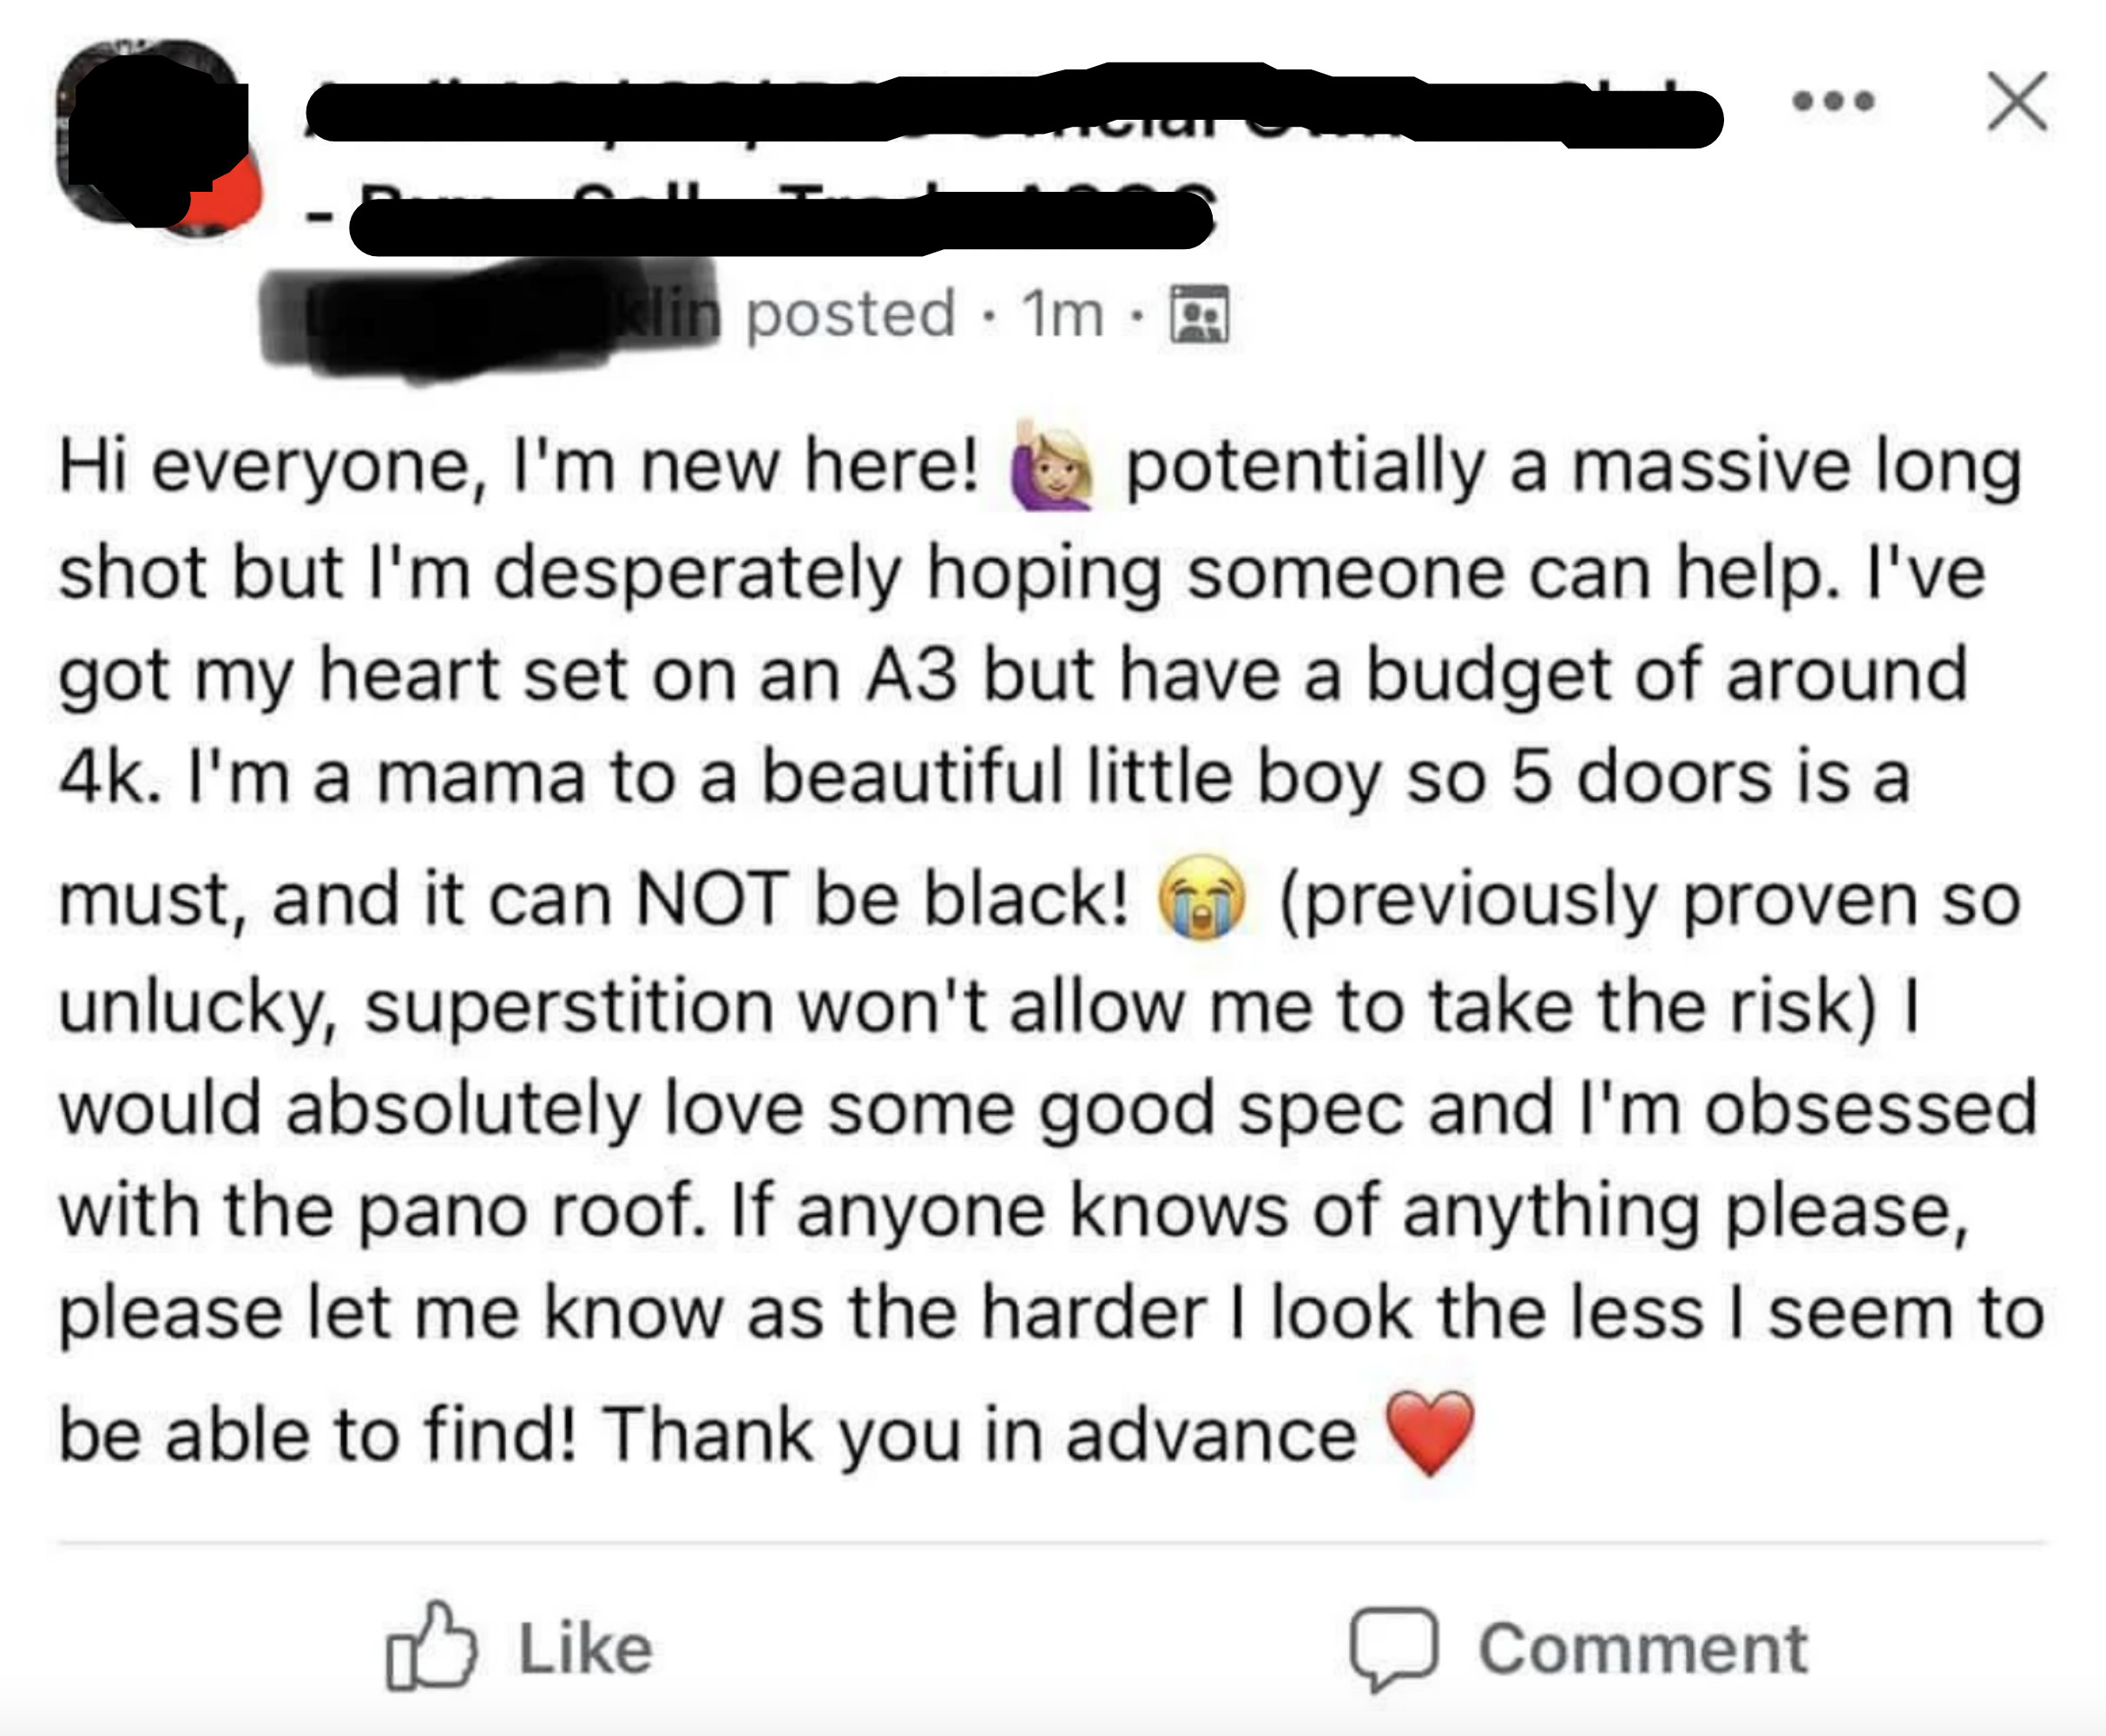 A woman&#x27;s post on social media says she wants a specific type of car, with requirements of the make, model, number of doors, and color, but will only pay $4,000